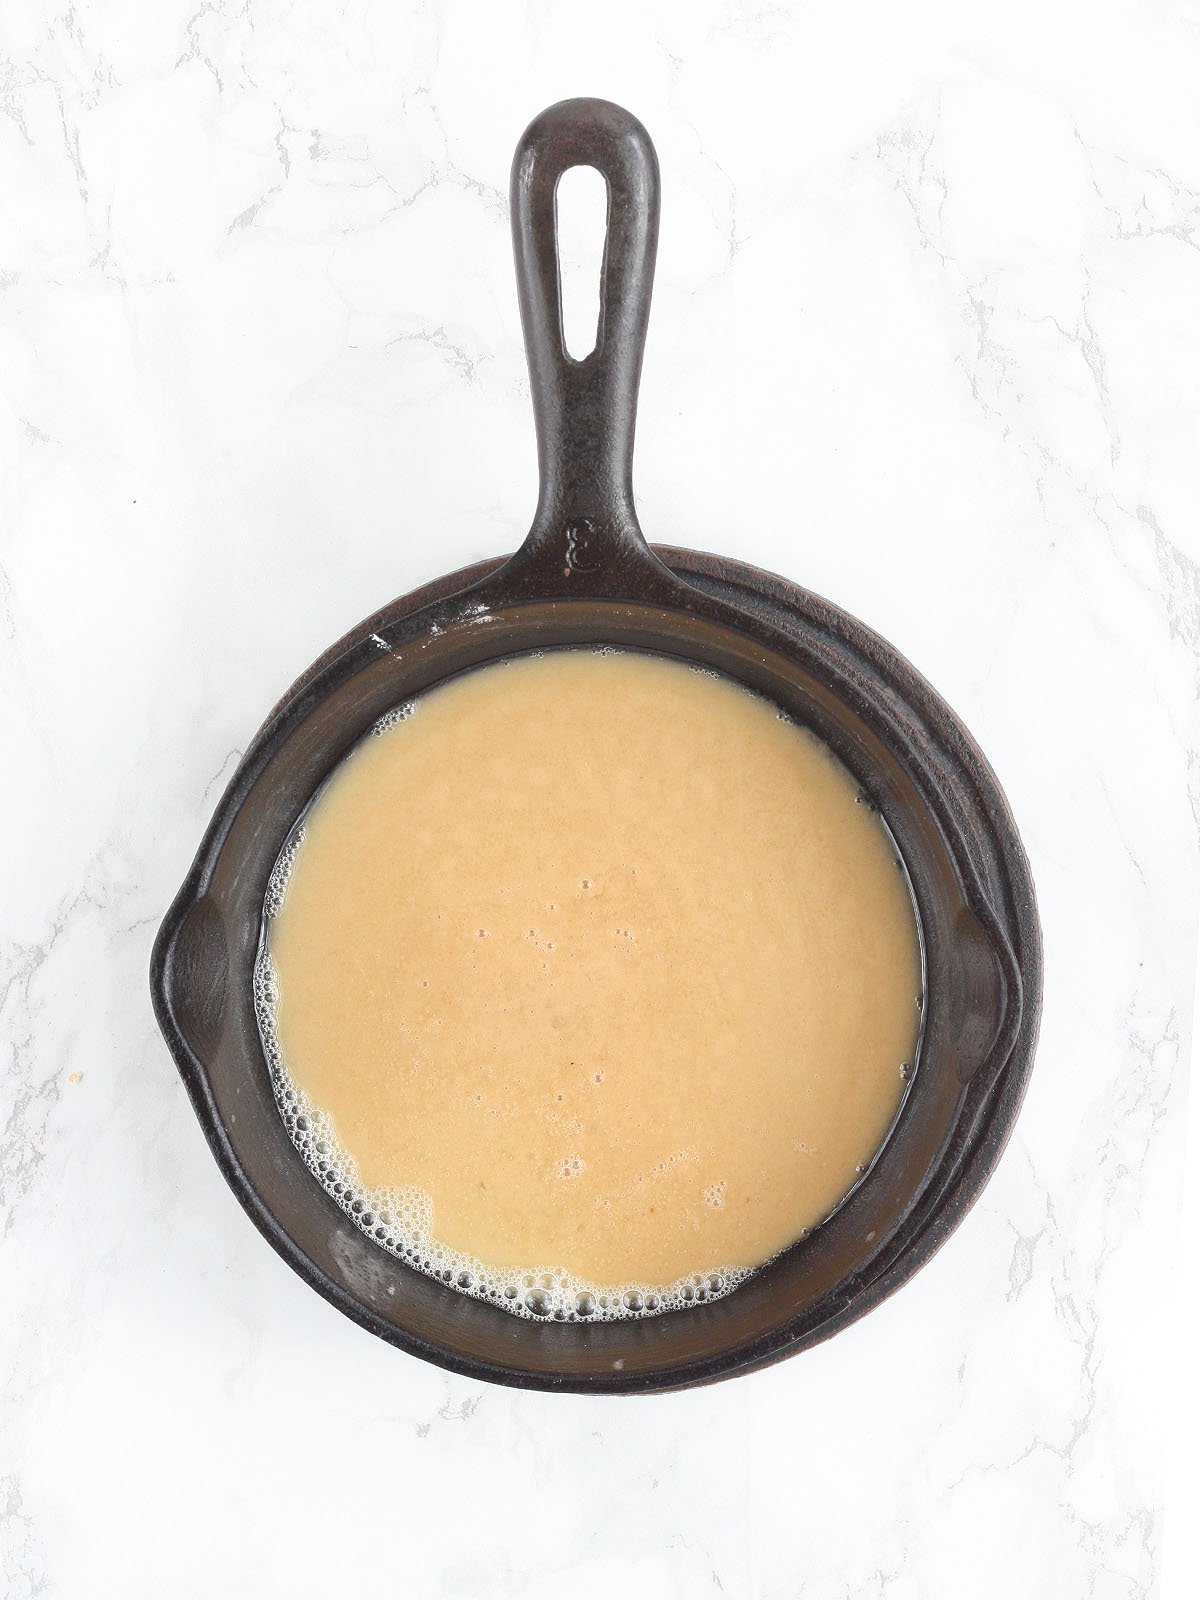 white roux in a cast iron skillet